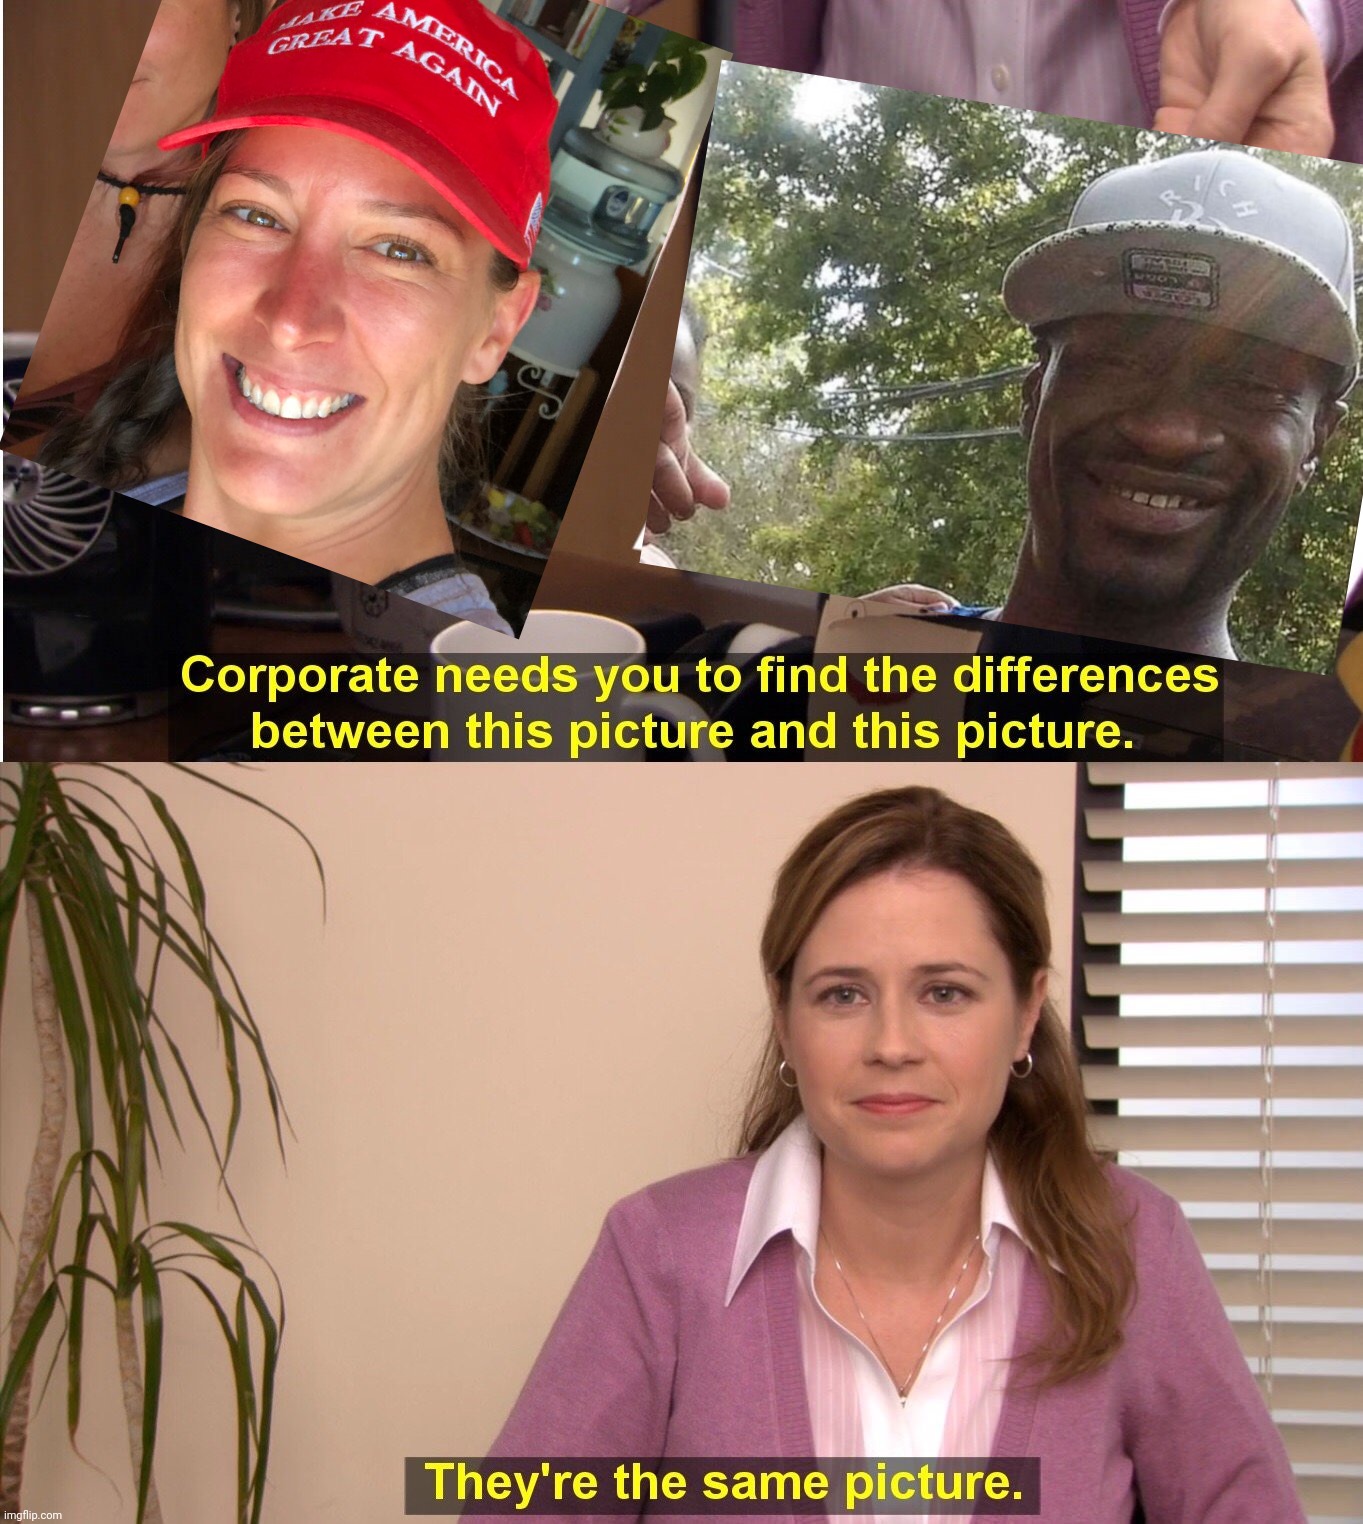 Two people killed for breaking the law. Charges of excessiveness. But the poli exploiters forget these were human beings too. | image tagged in they're the same picture,ashli babbit,george floyd,team tee politicks sucks blood,leftrightleftrightleft,horseshoe theory | made w/ Imgflip meme maker